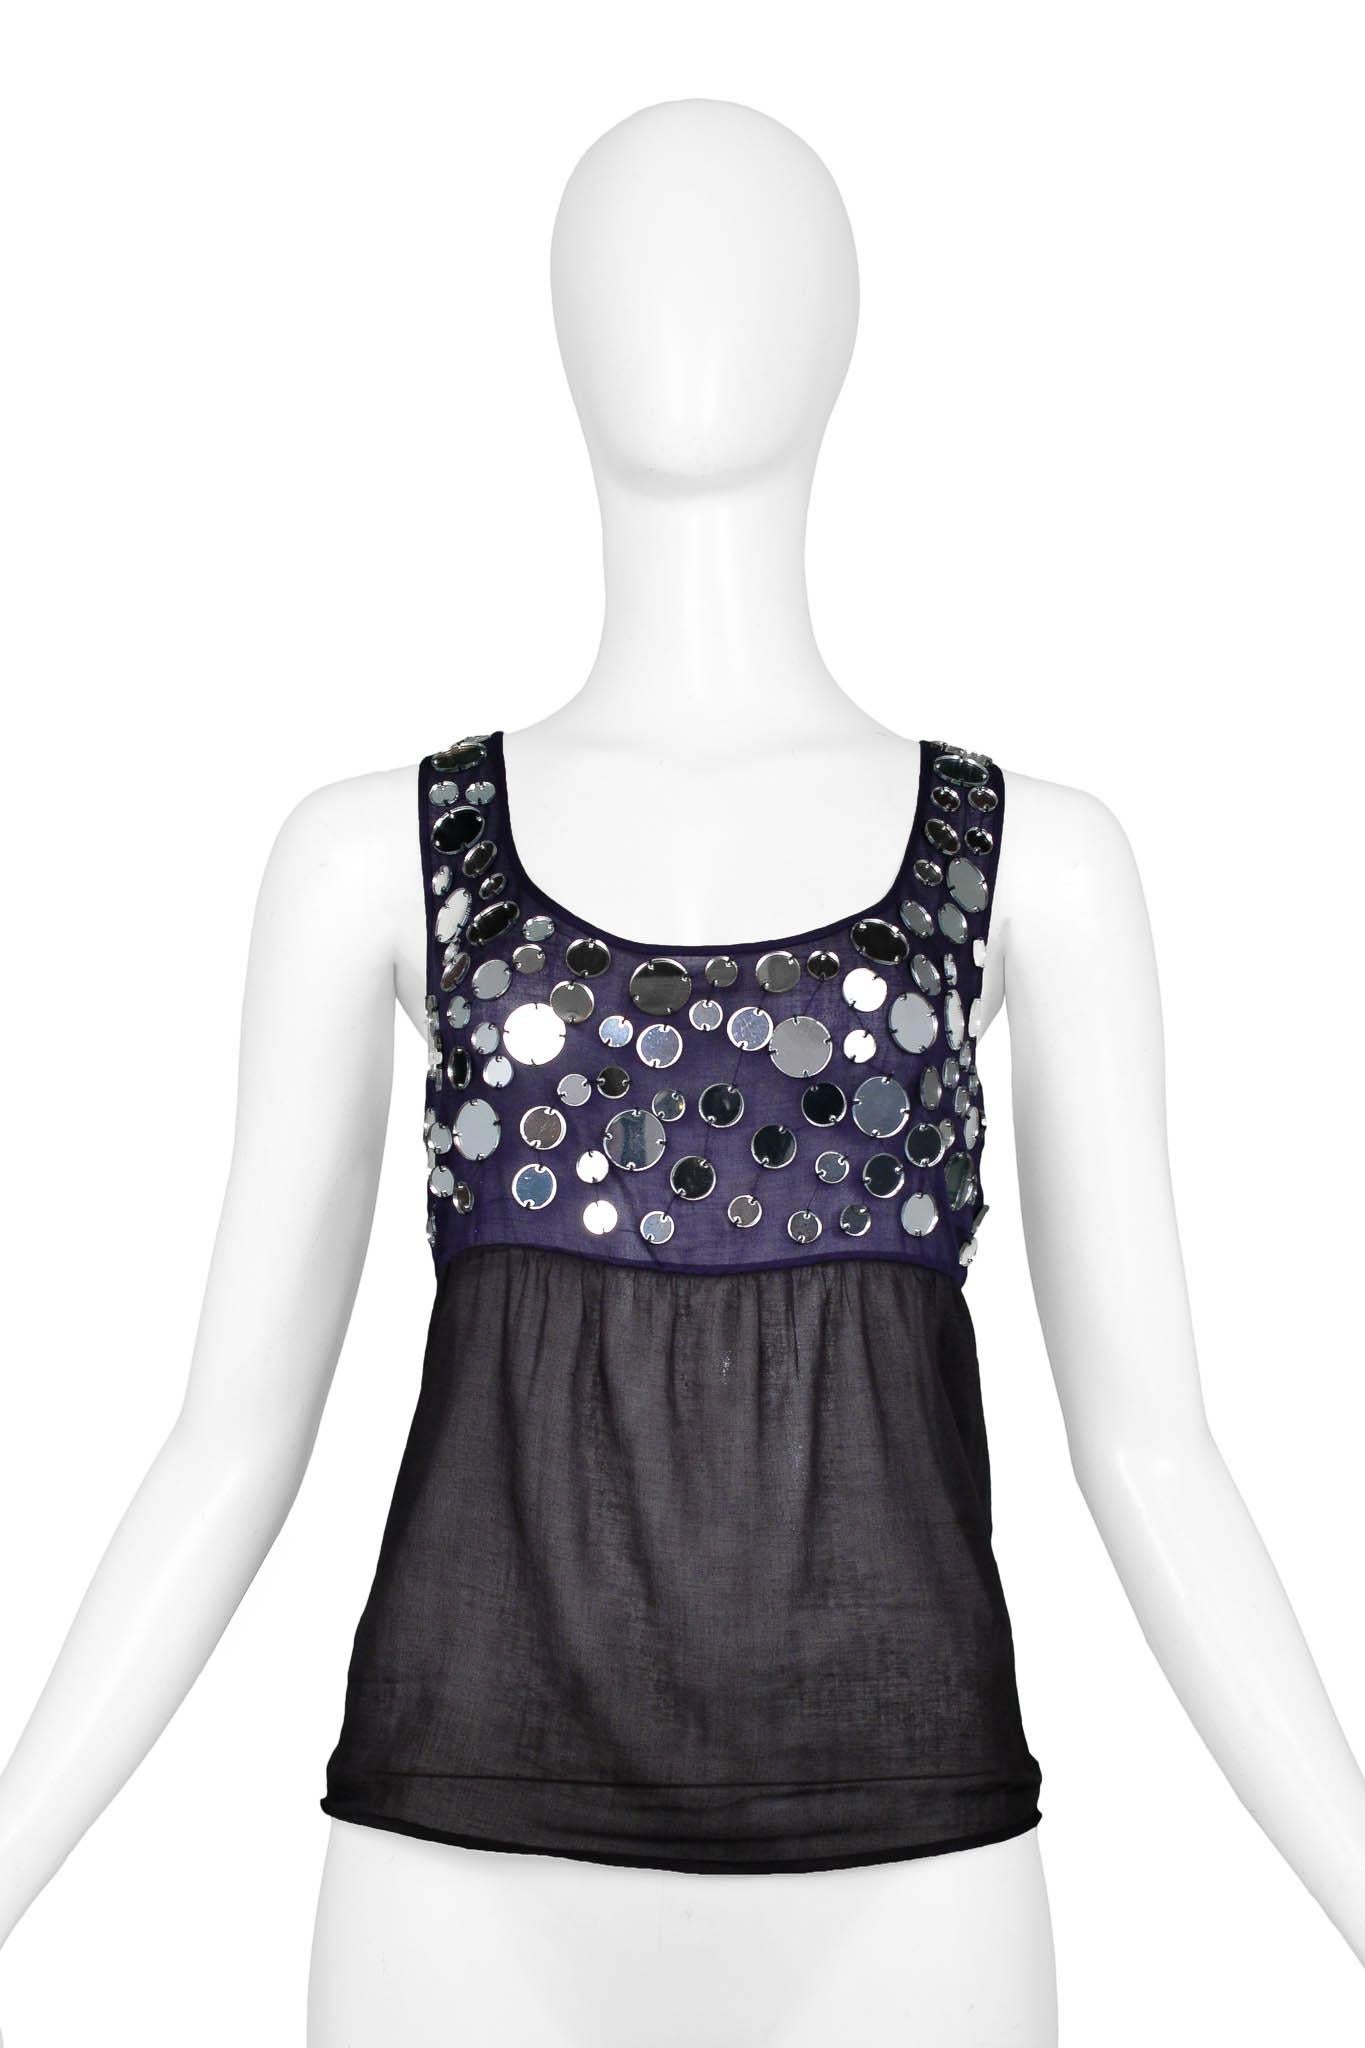 Resurrection Vintage is excited to offer an iconic Miu Miu sheer tank top featuring black & navy color blocking, multi-sized mirror detailing, and a scoop neck.

Miu Miu
Size: 42
100% Cotton
Excellent Vintage Condition
Authenticity guaranteed